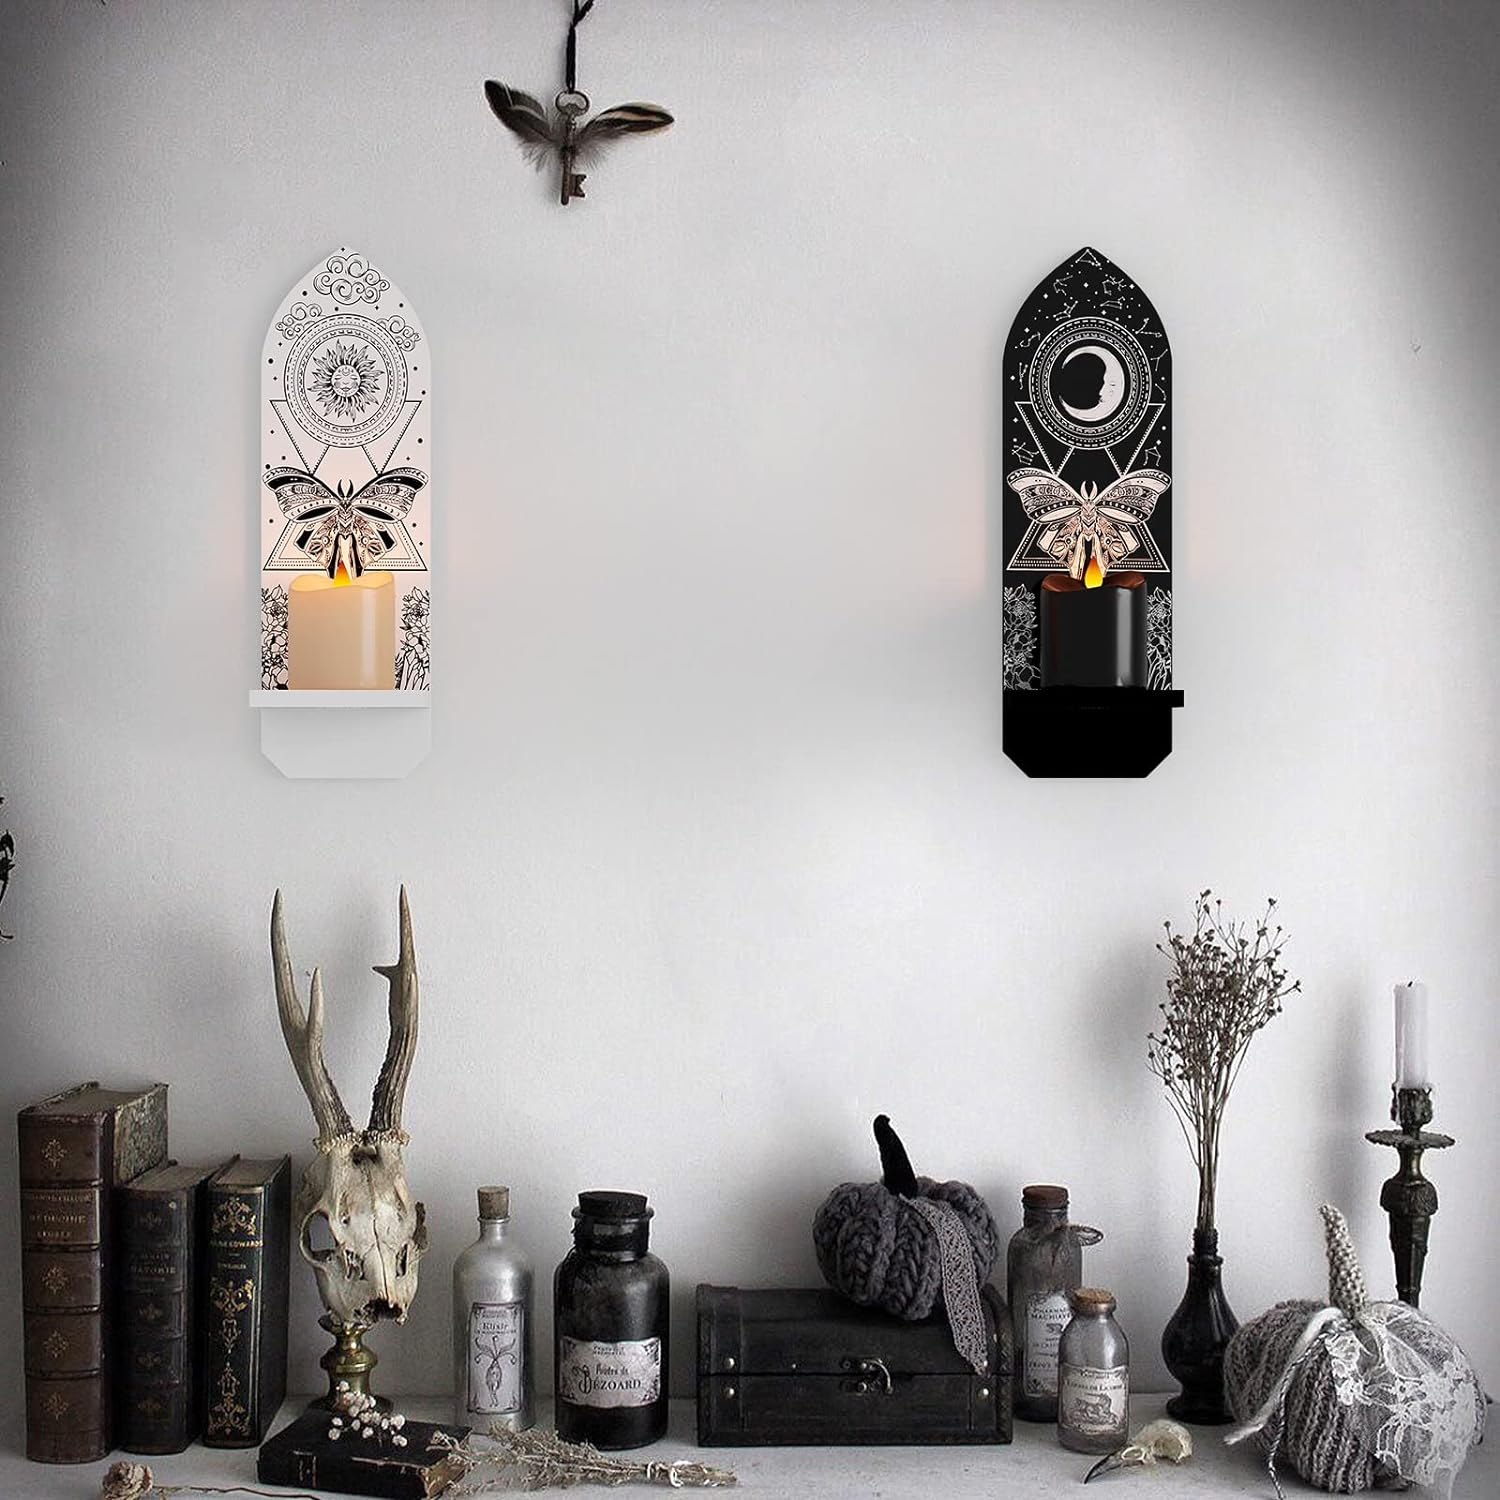 Faivykyd Sun  Moon Gothic Candle Holder,Wooden Witchy Shelf Wall Decor Set Two,Magical Spiritual Astrology Wall Art,Crystal Display Shelf Bedroom Living Room Meditation Room Altar 2210 Black/White : Amazon.ca: Home